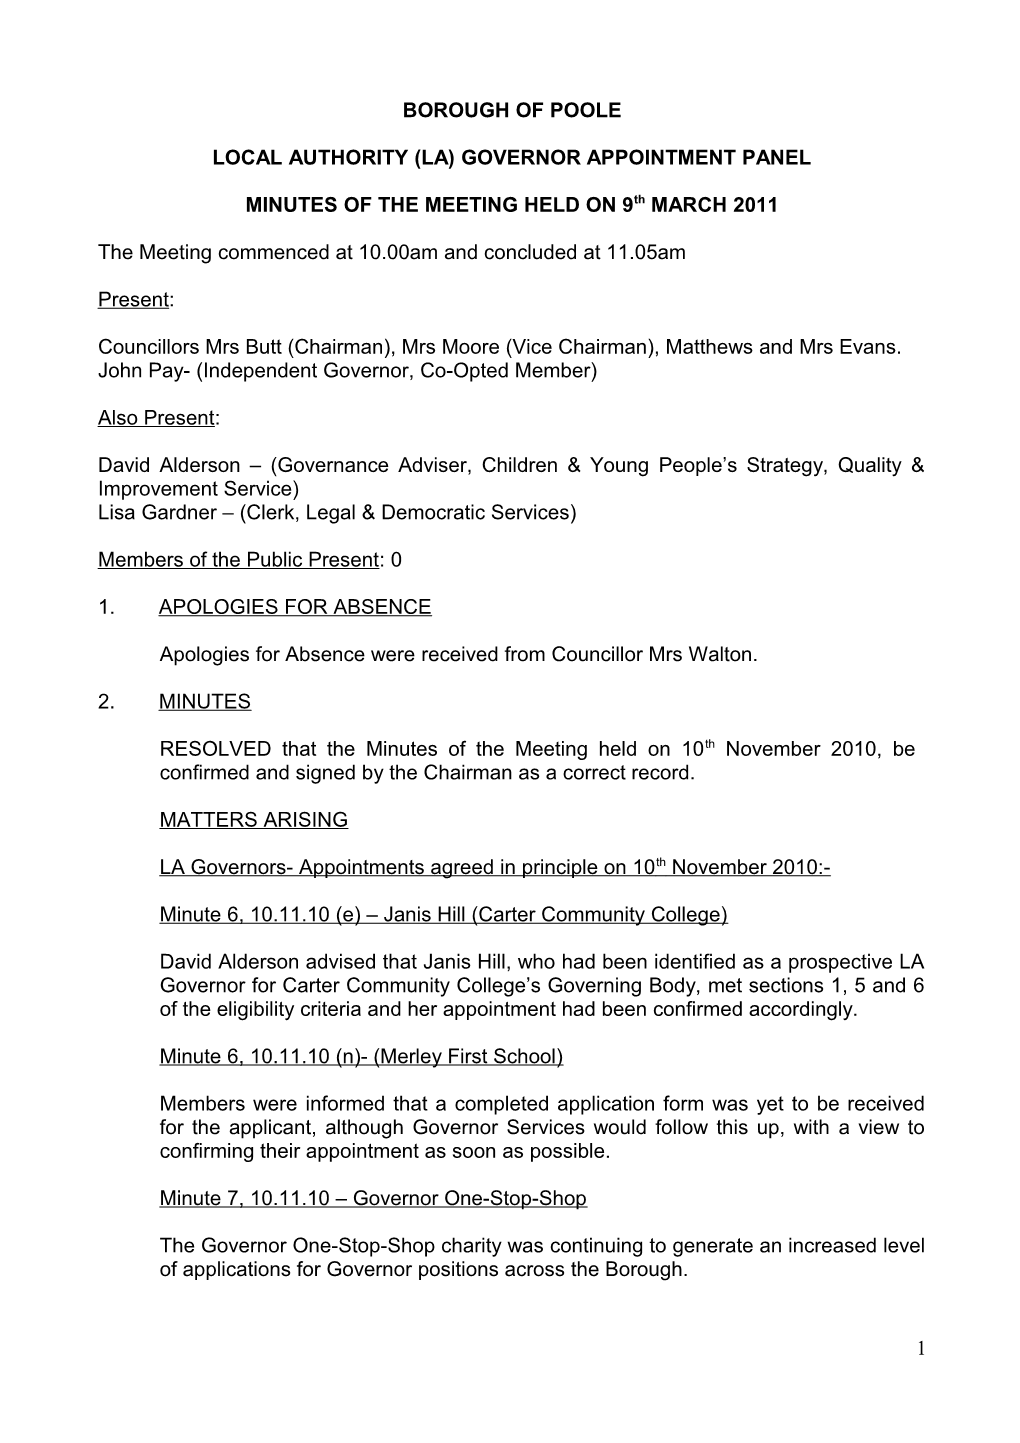 Minutes - Local Authority Governor Appointment Panel - 9 March 2011